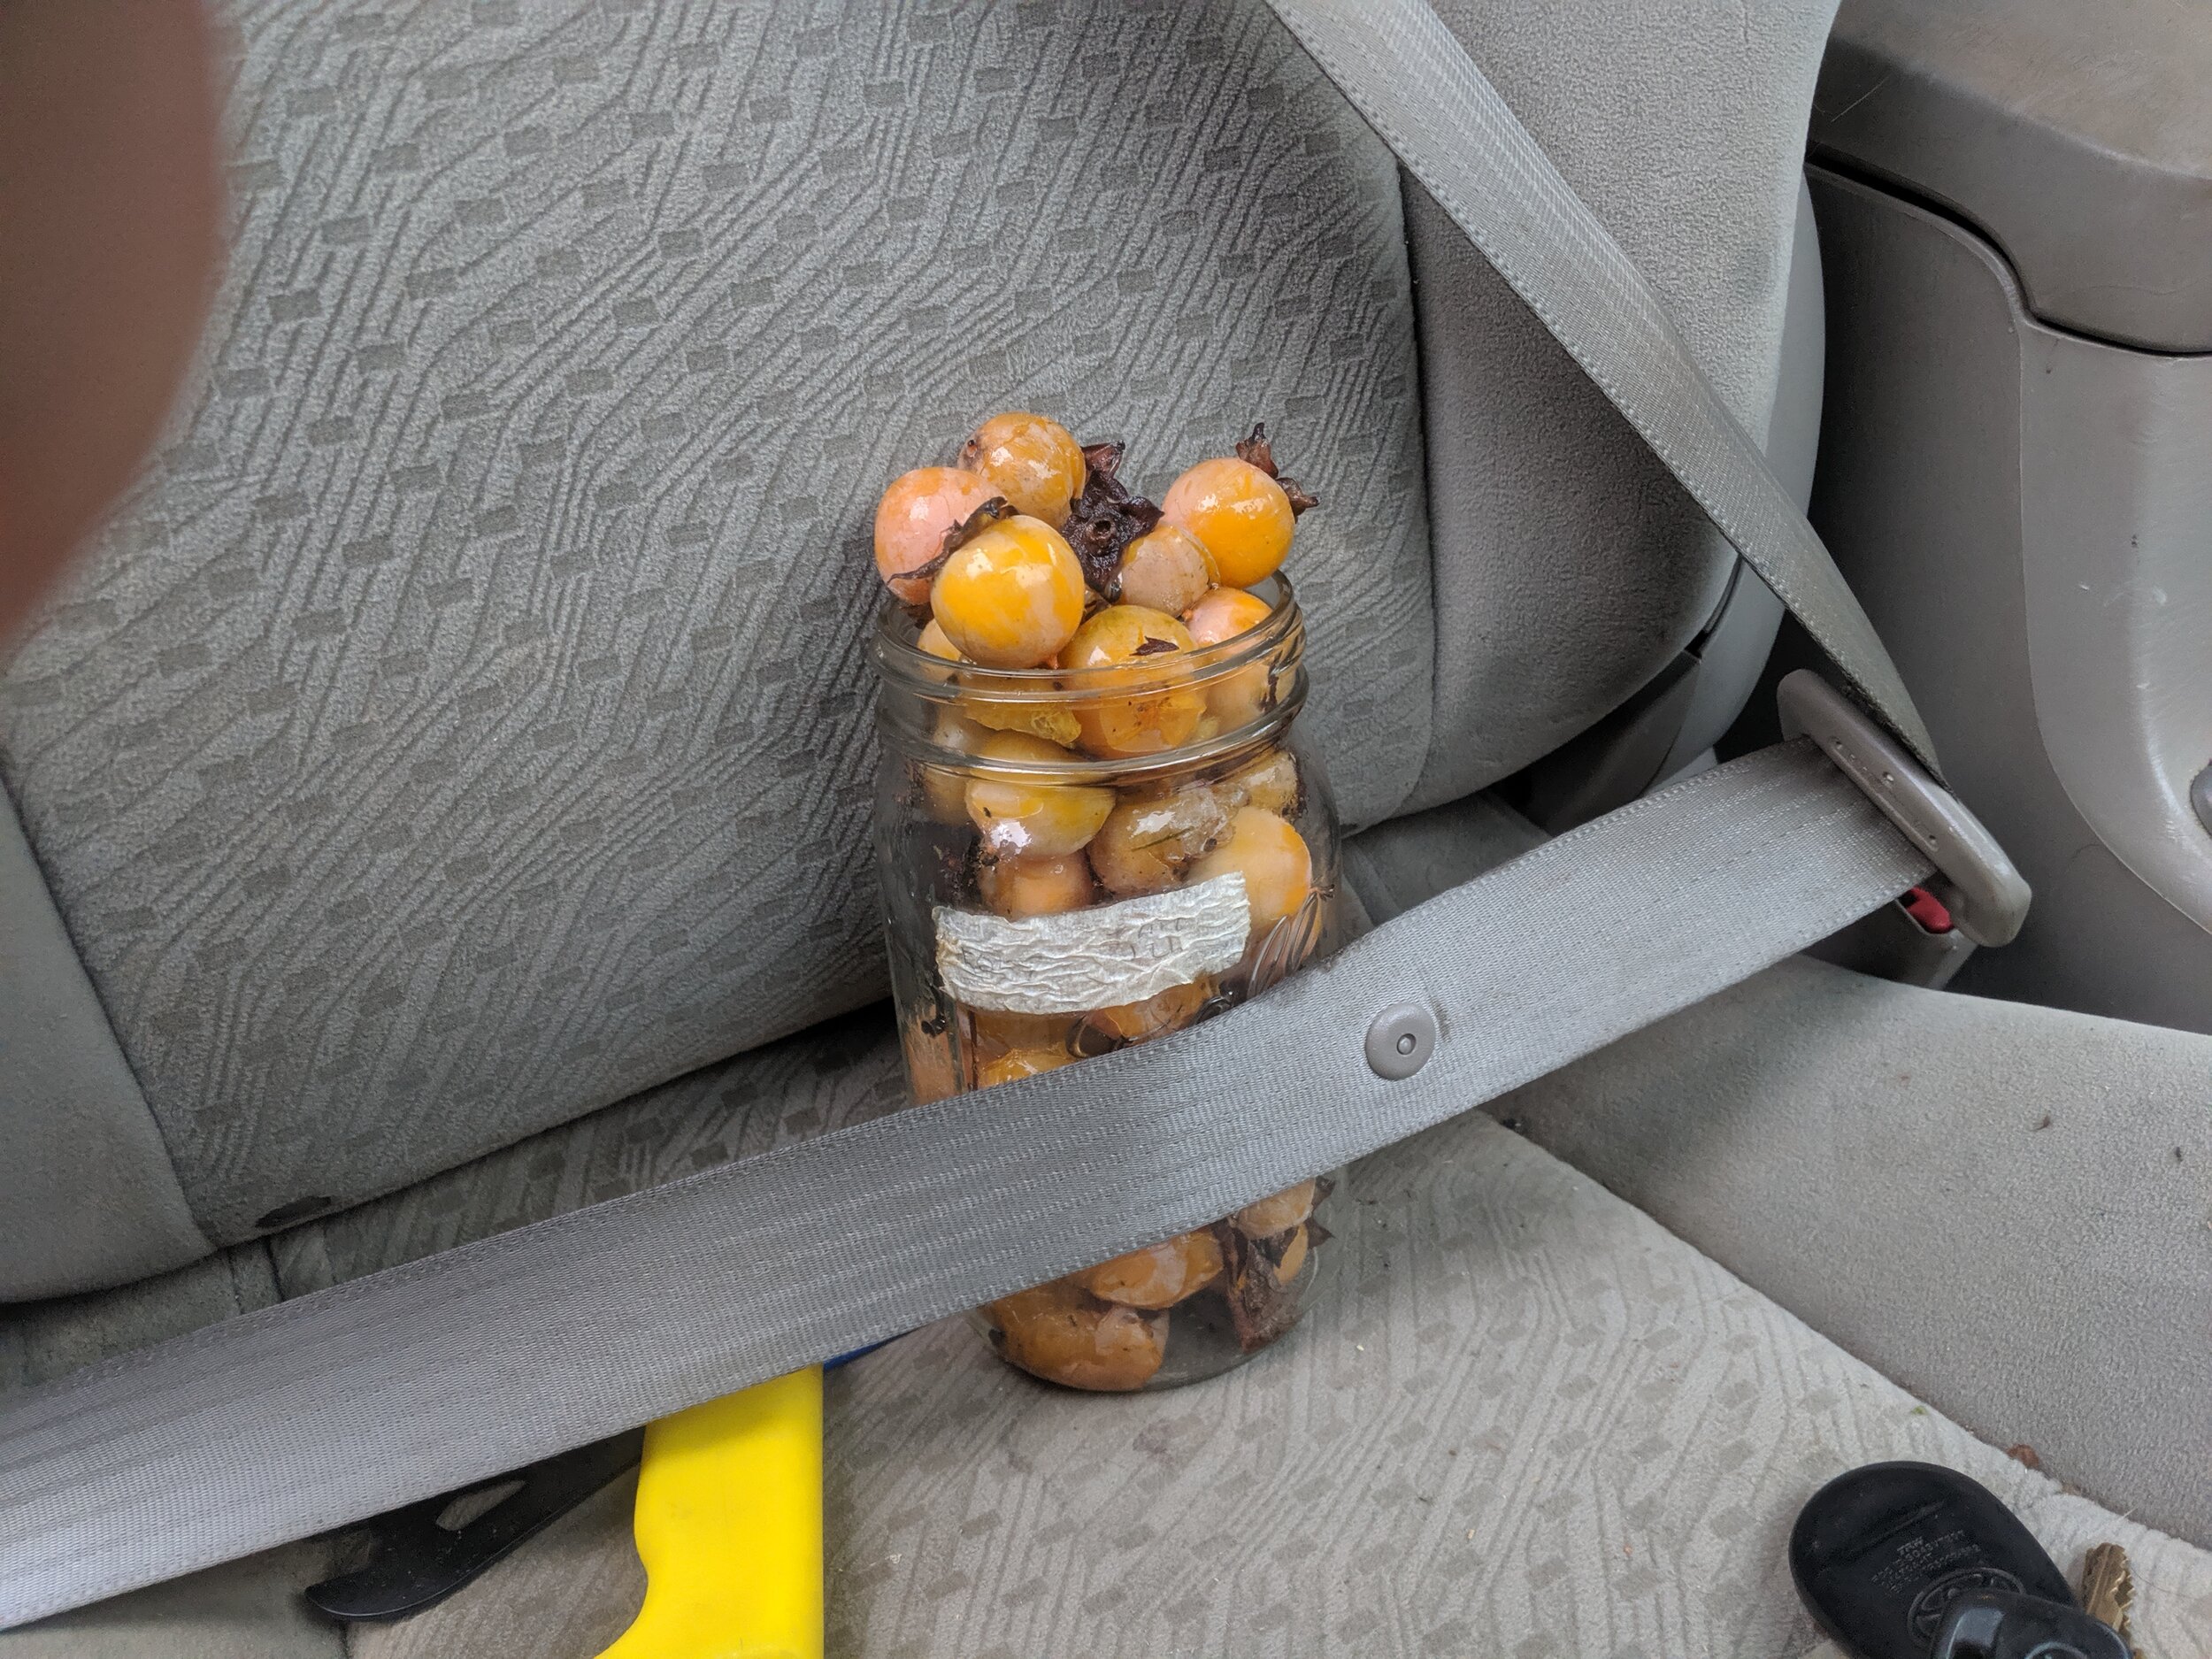  We are always collecting seeds from good stock for our plants, and sometimes have to improvise! These American Persimmons were found in Ithaca, NY, and made a delicious fall snack in the process of harvesting their seeds. 